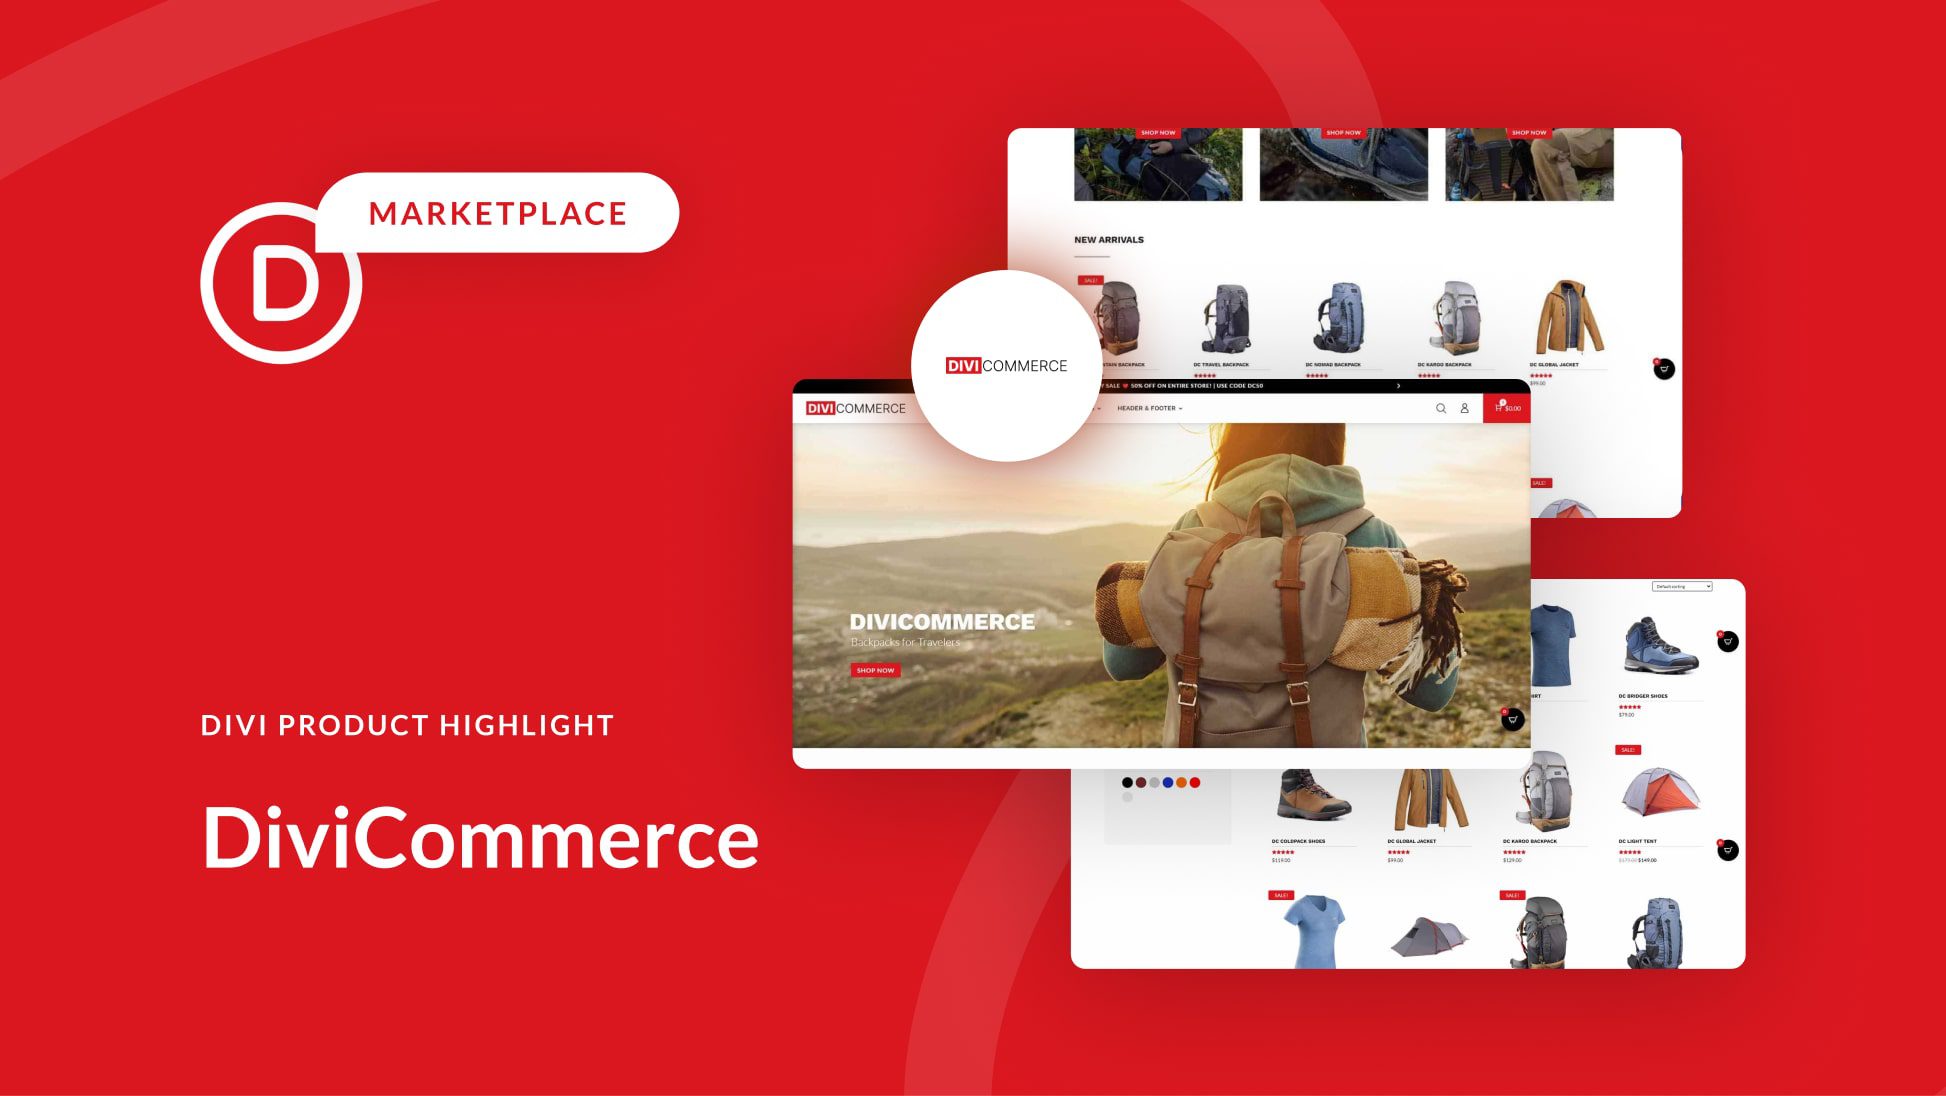 Divi Product Highlight: DiviCommerce